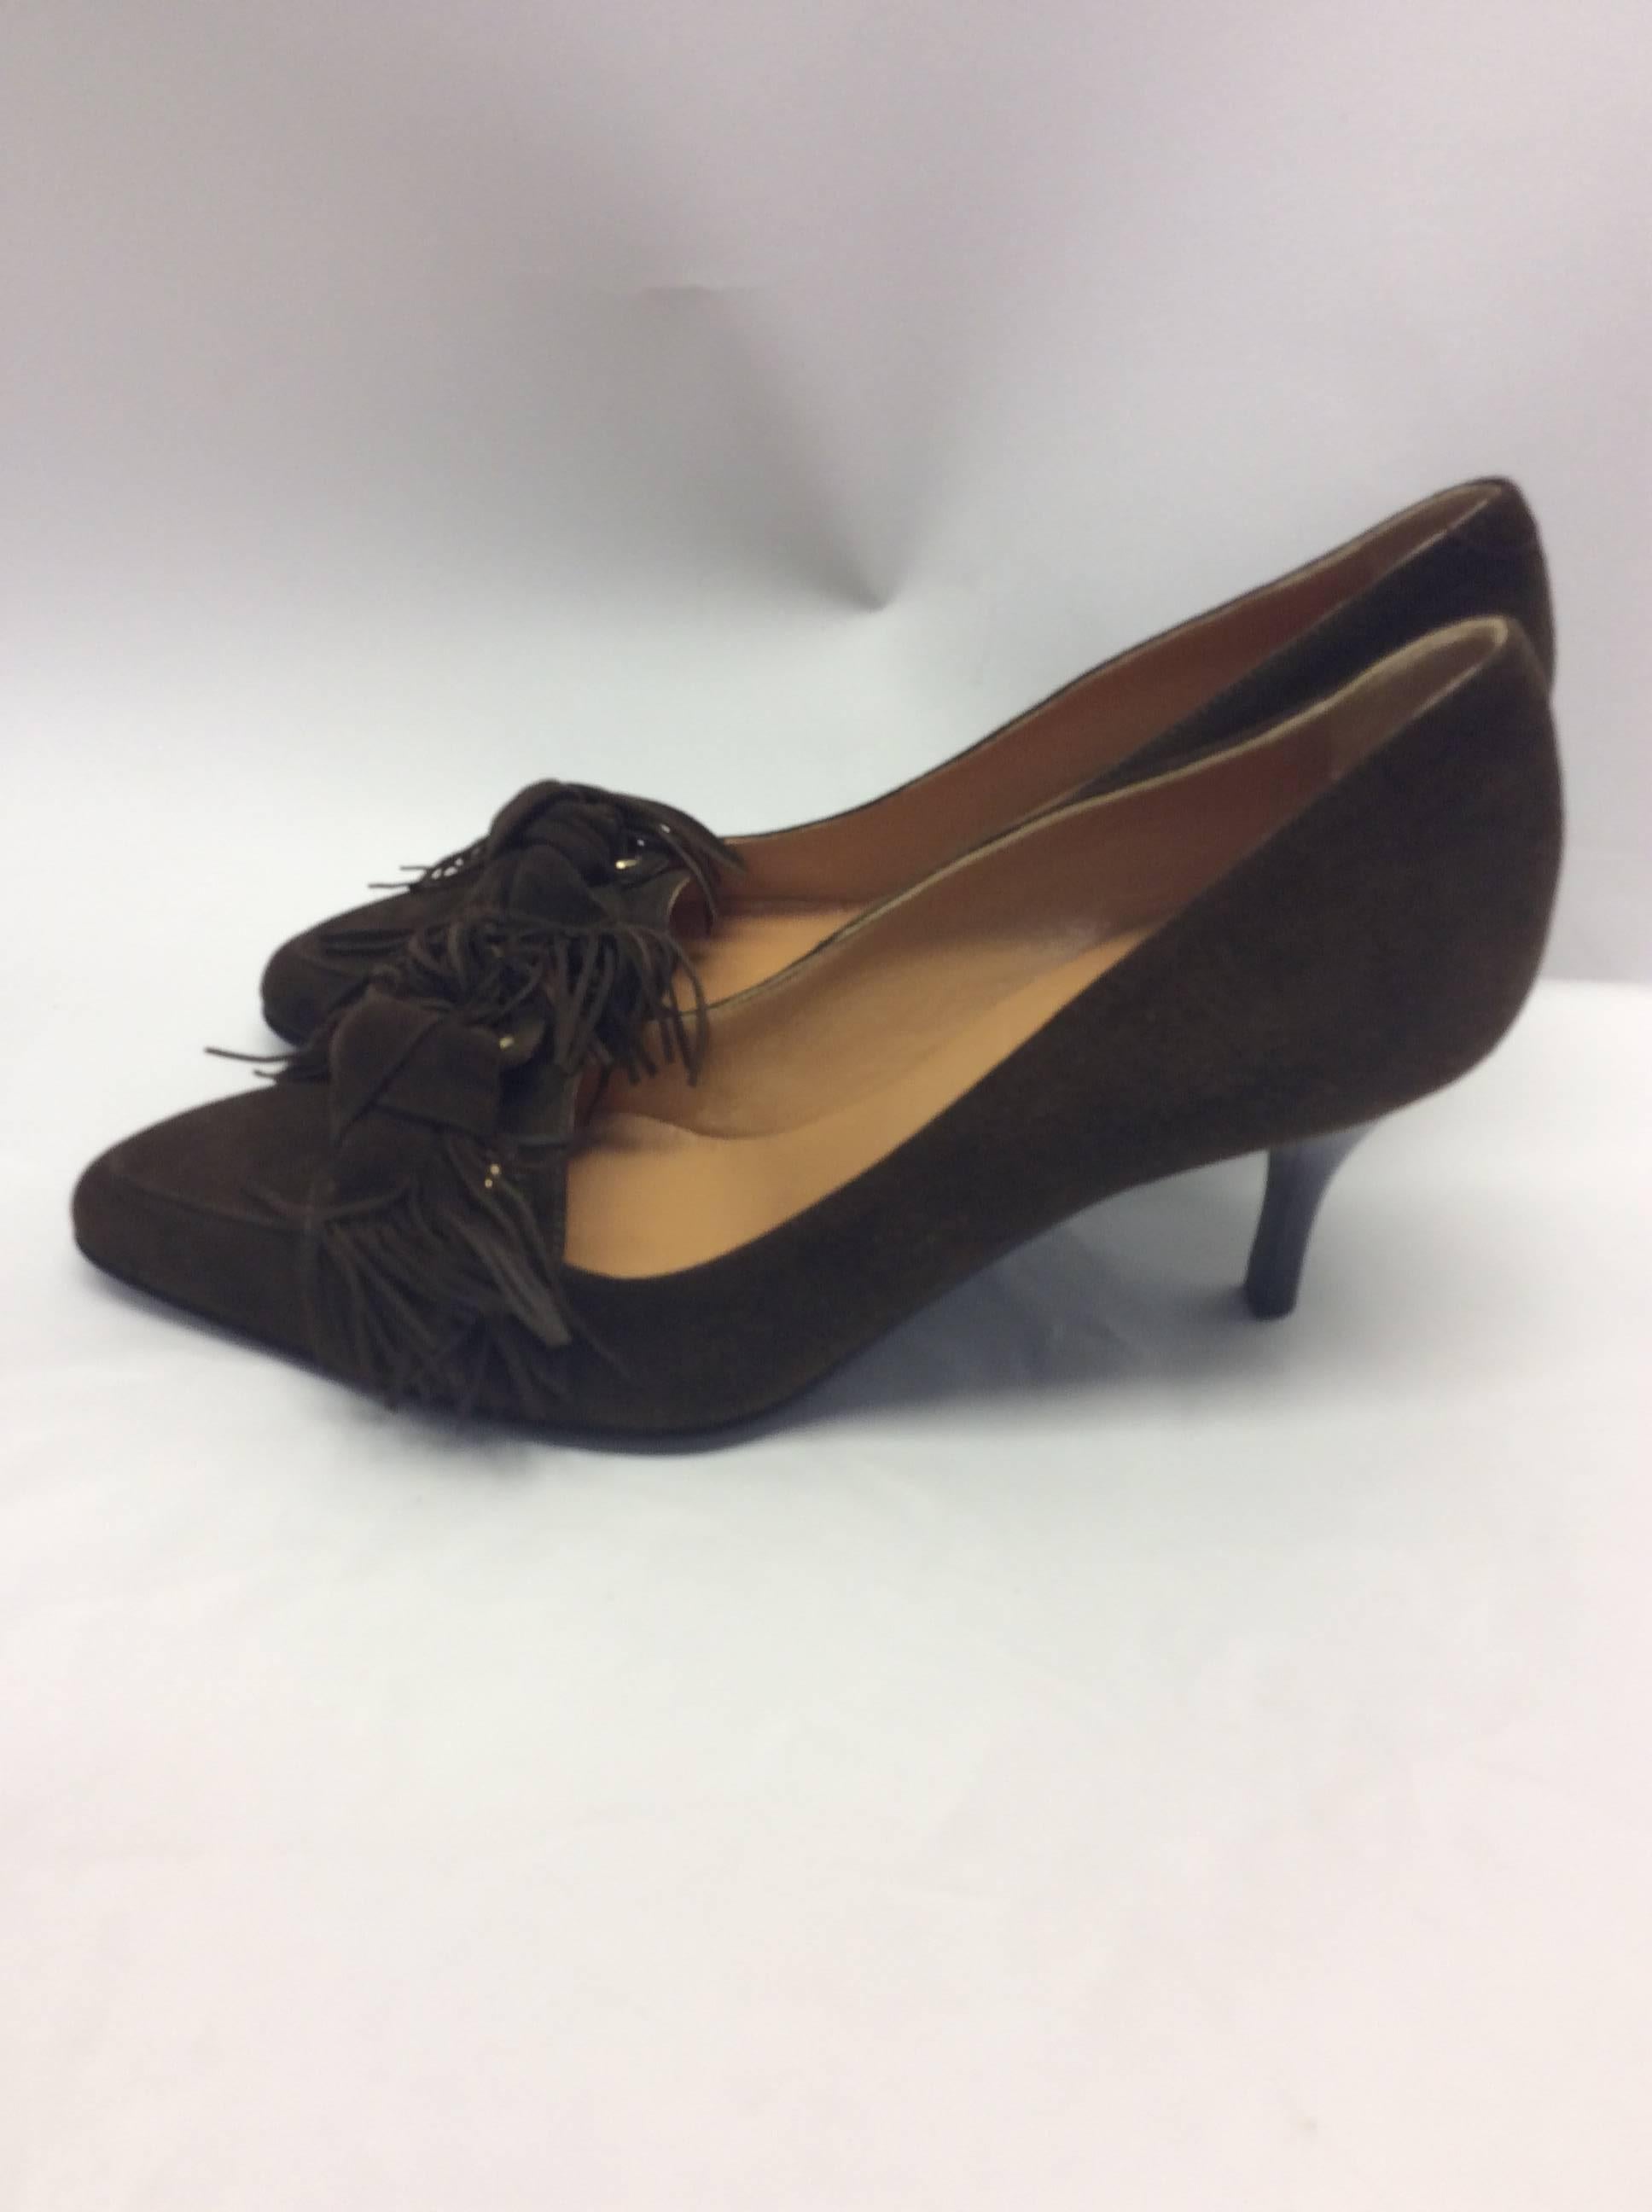 Hermes Suede Fringe Pumps In Excellent Condition For Sale In Narberth, PA